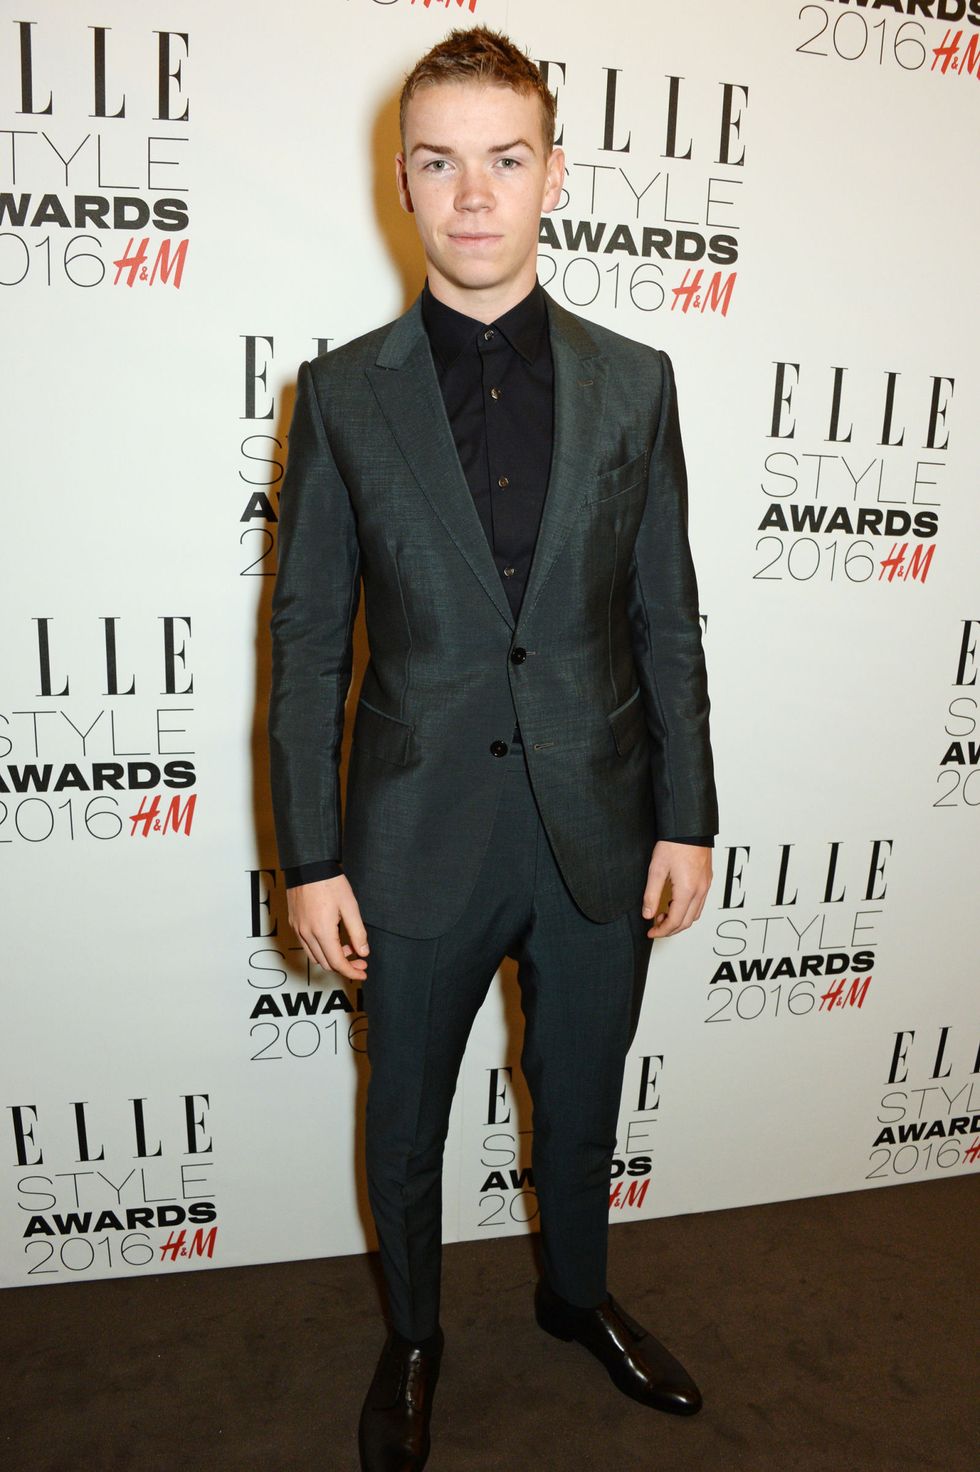 Elle Style Awards 2016: Will Poulter